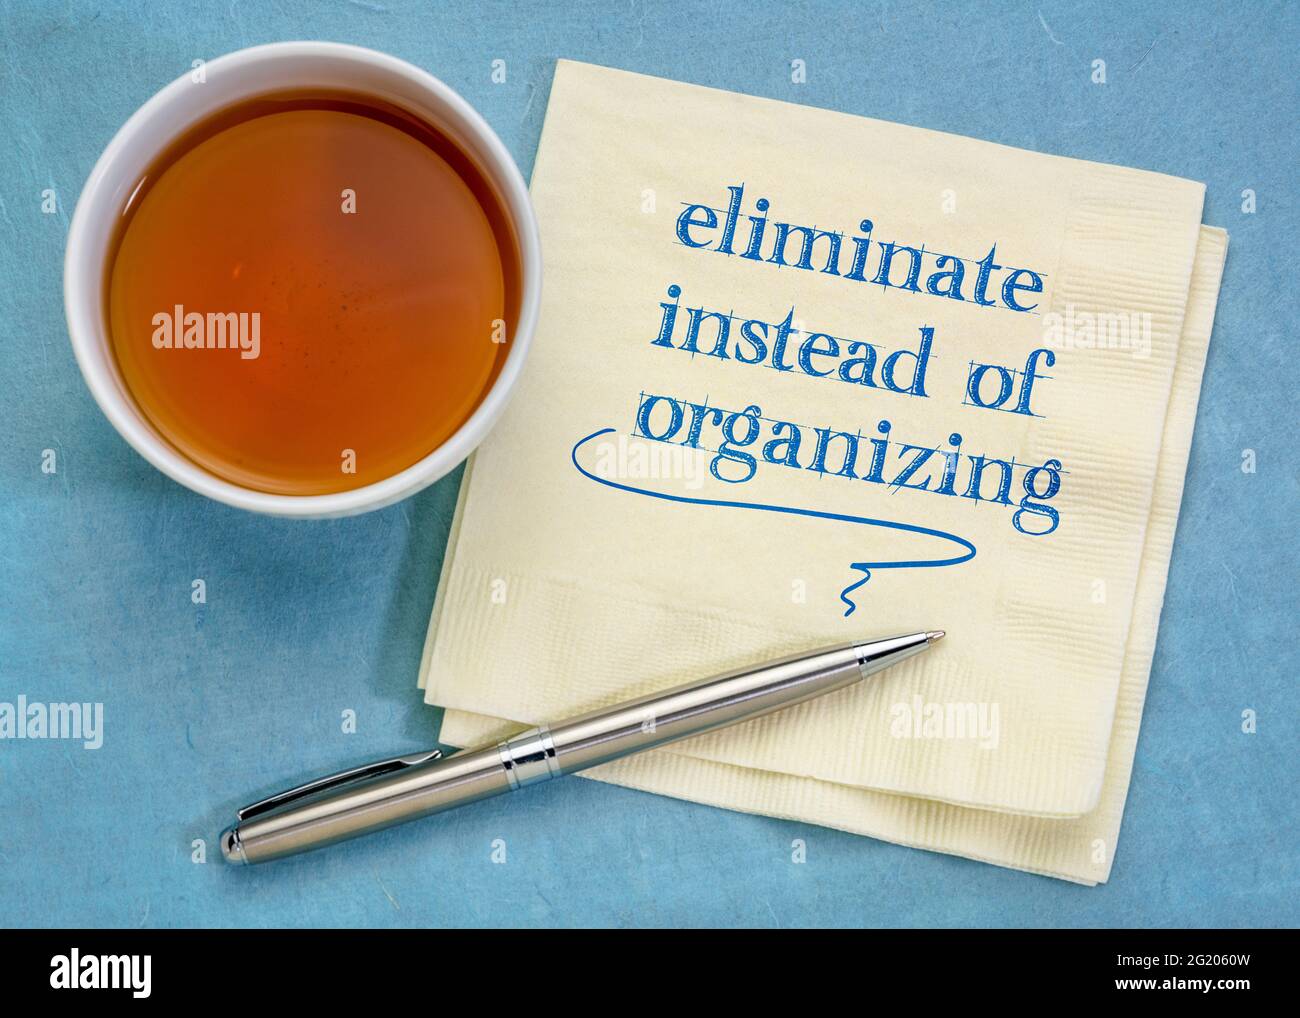 eliminate instead of organizing - handwriting on a napkin with a cup of tea, simplicity and decluttering concept Stock Photo